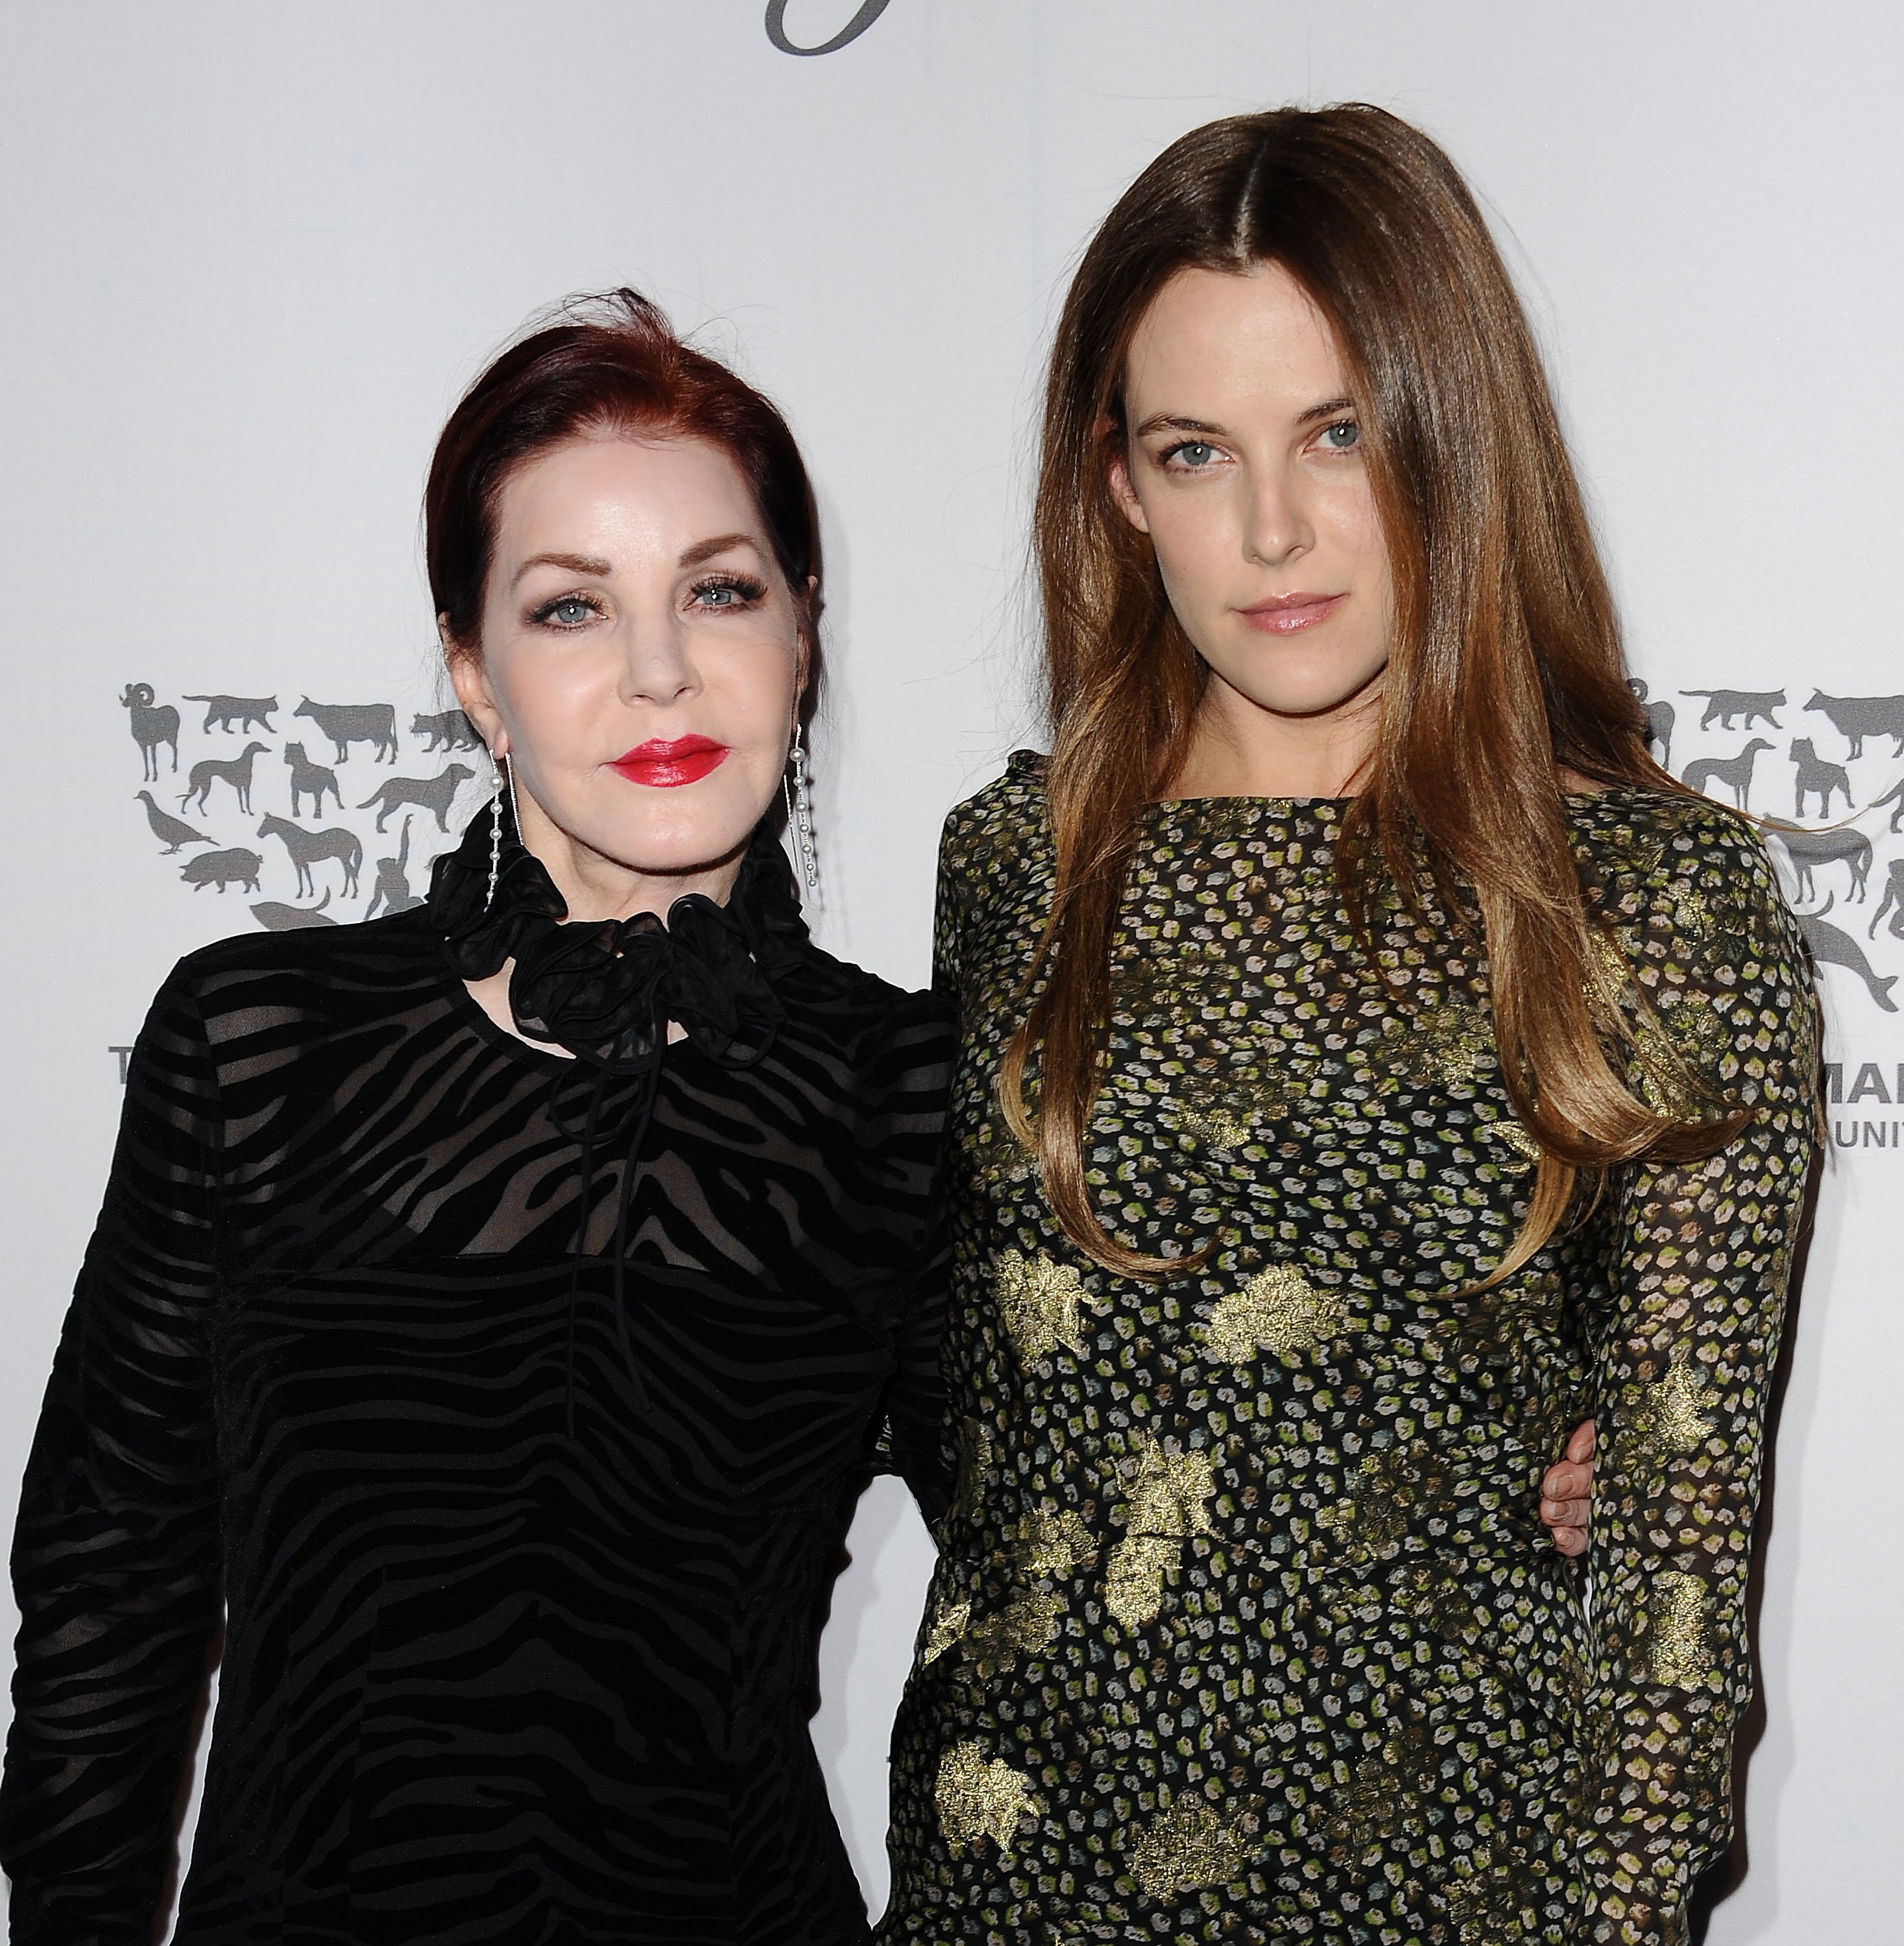 Priscilla Presley and Riley Keough at Paramount Studios on May 07, 2016 in Hollywood, California | Source: Getty Images